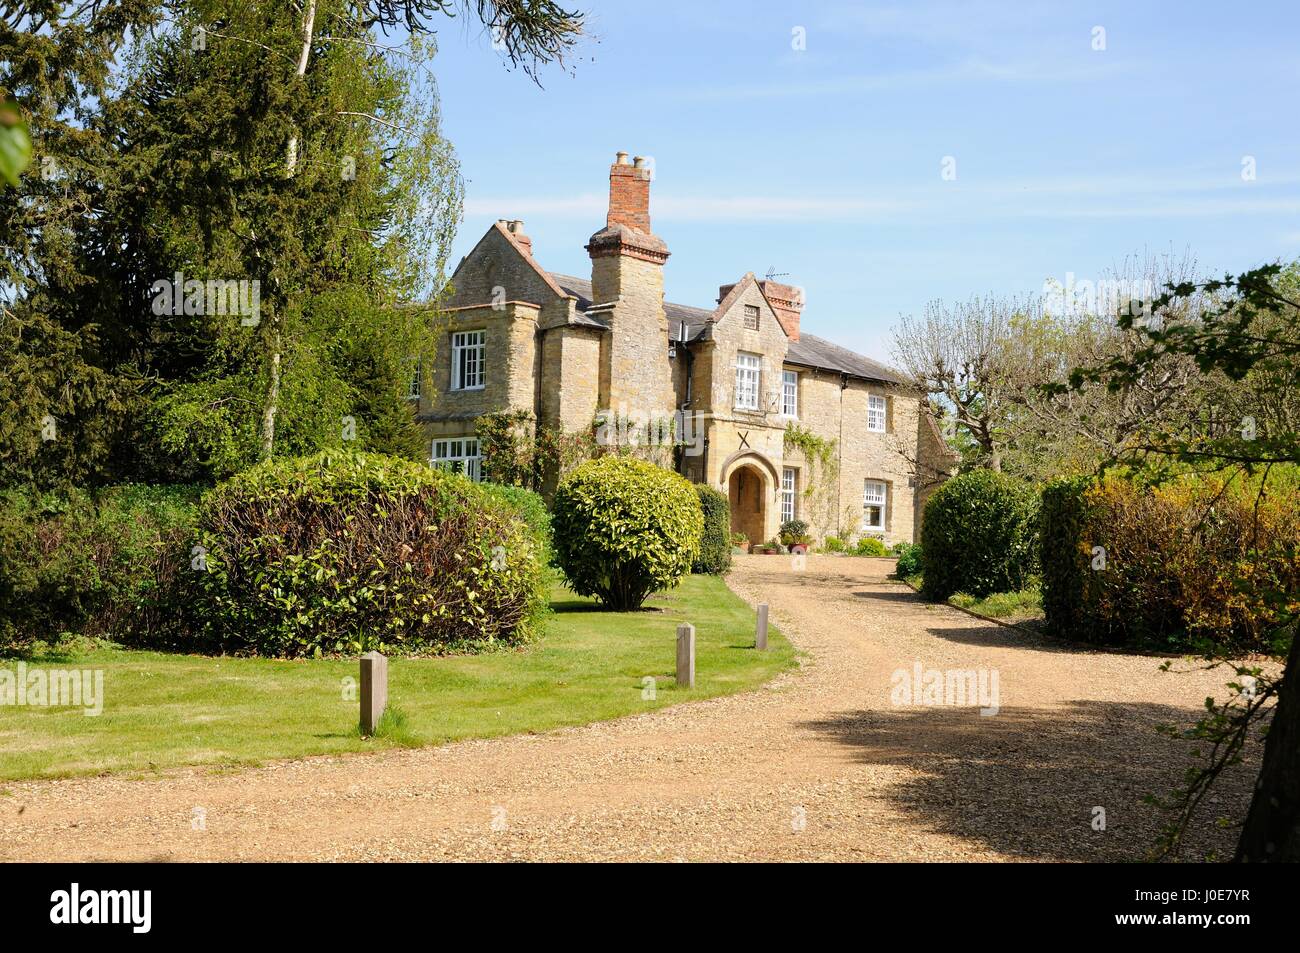 The Old Rectory, Milton Ernest, Bedfordshire Stock Photo